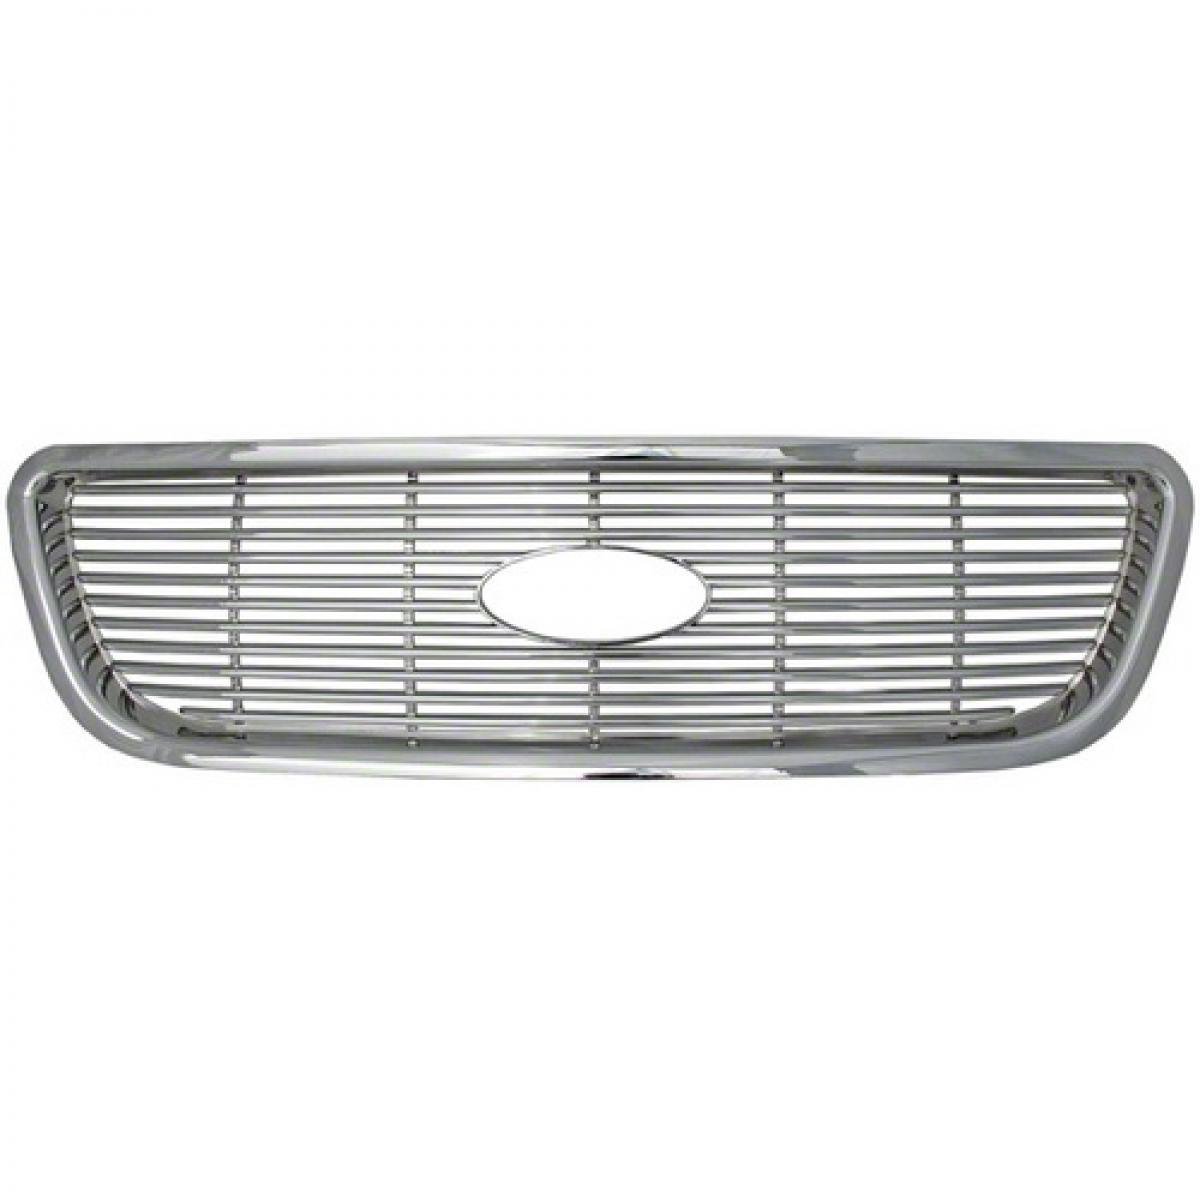 Picture of Coast2Coast C2C-GI113 Ford Grille Overlay for 2012-2014 Ford F150 XL-STX- FX2- FX4, Chrome